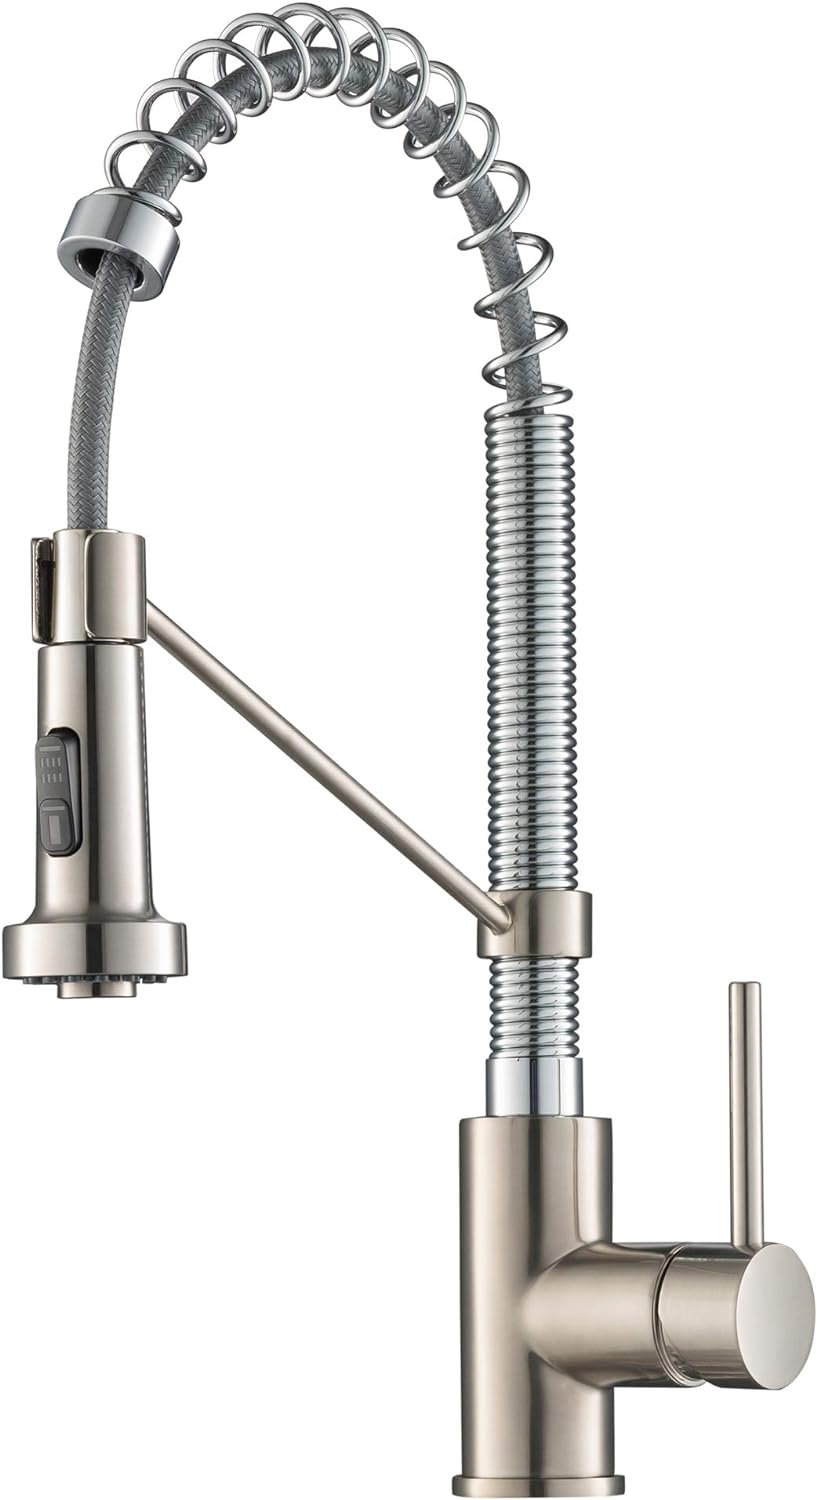 Kraus KPF-1610SFSCH Bolden 18-Inch Commercial Kitchen Faucet with Dual Function Pull-Down Sprayhead in All-Brite Finish, Spot Free Stainless Steel/Chrome